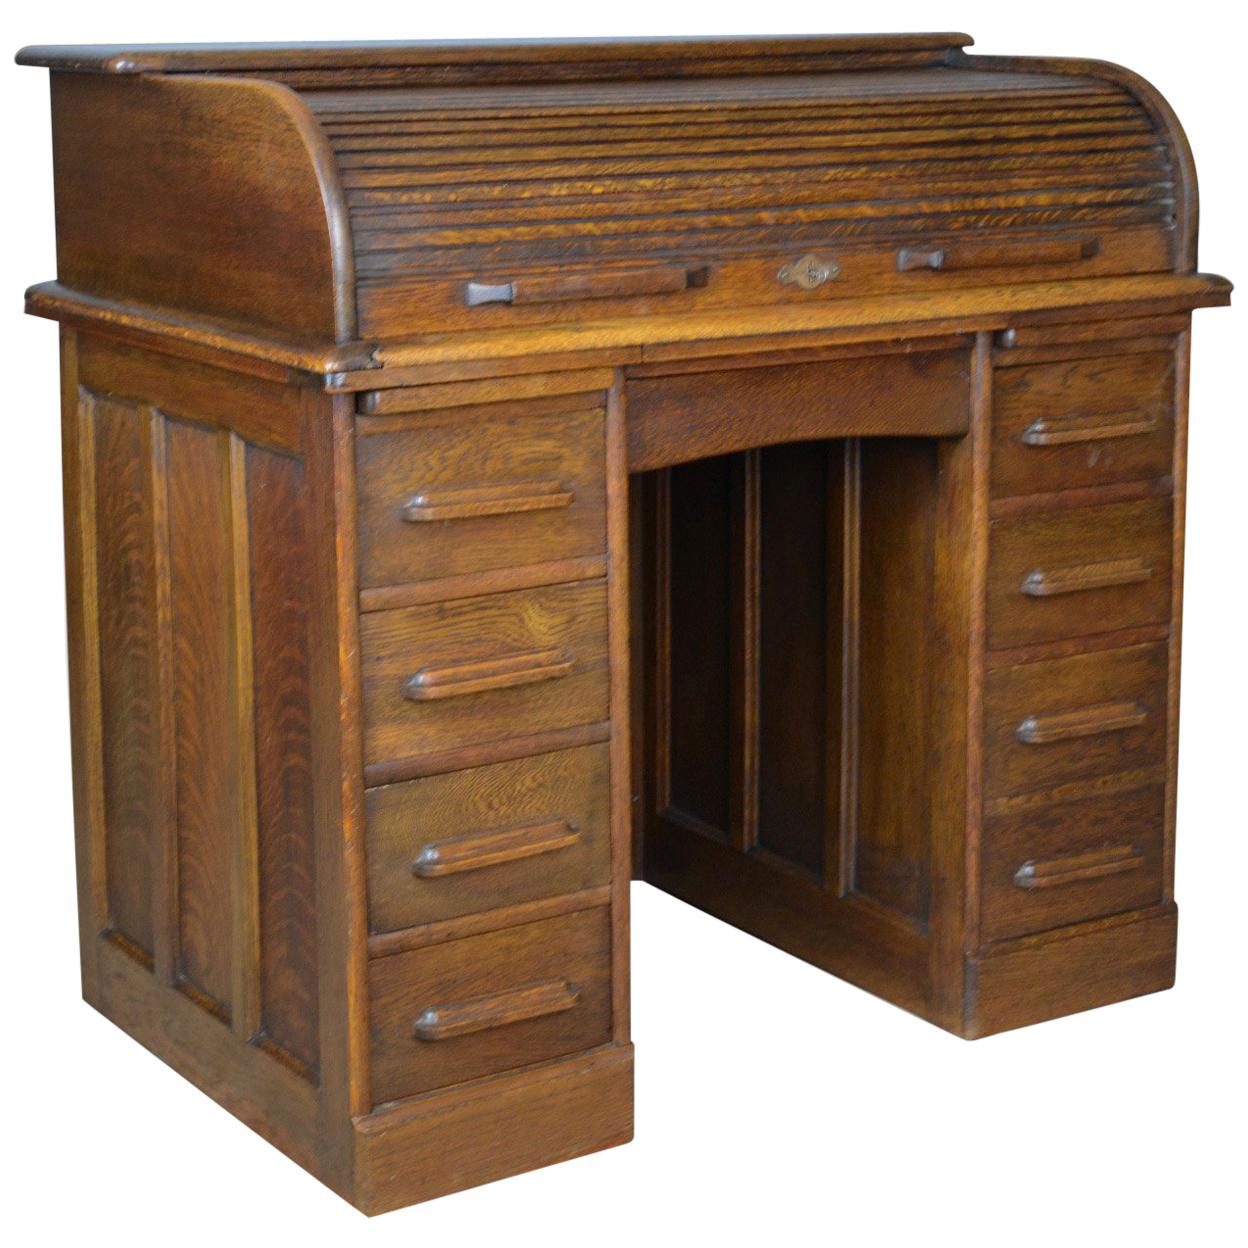 Small Antique Roll Top Desk, Oak, Tambour, William Angus and Co Ltd London